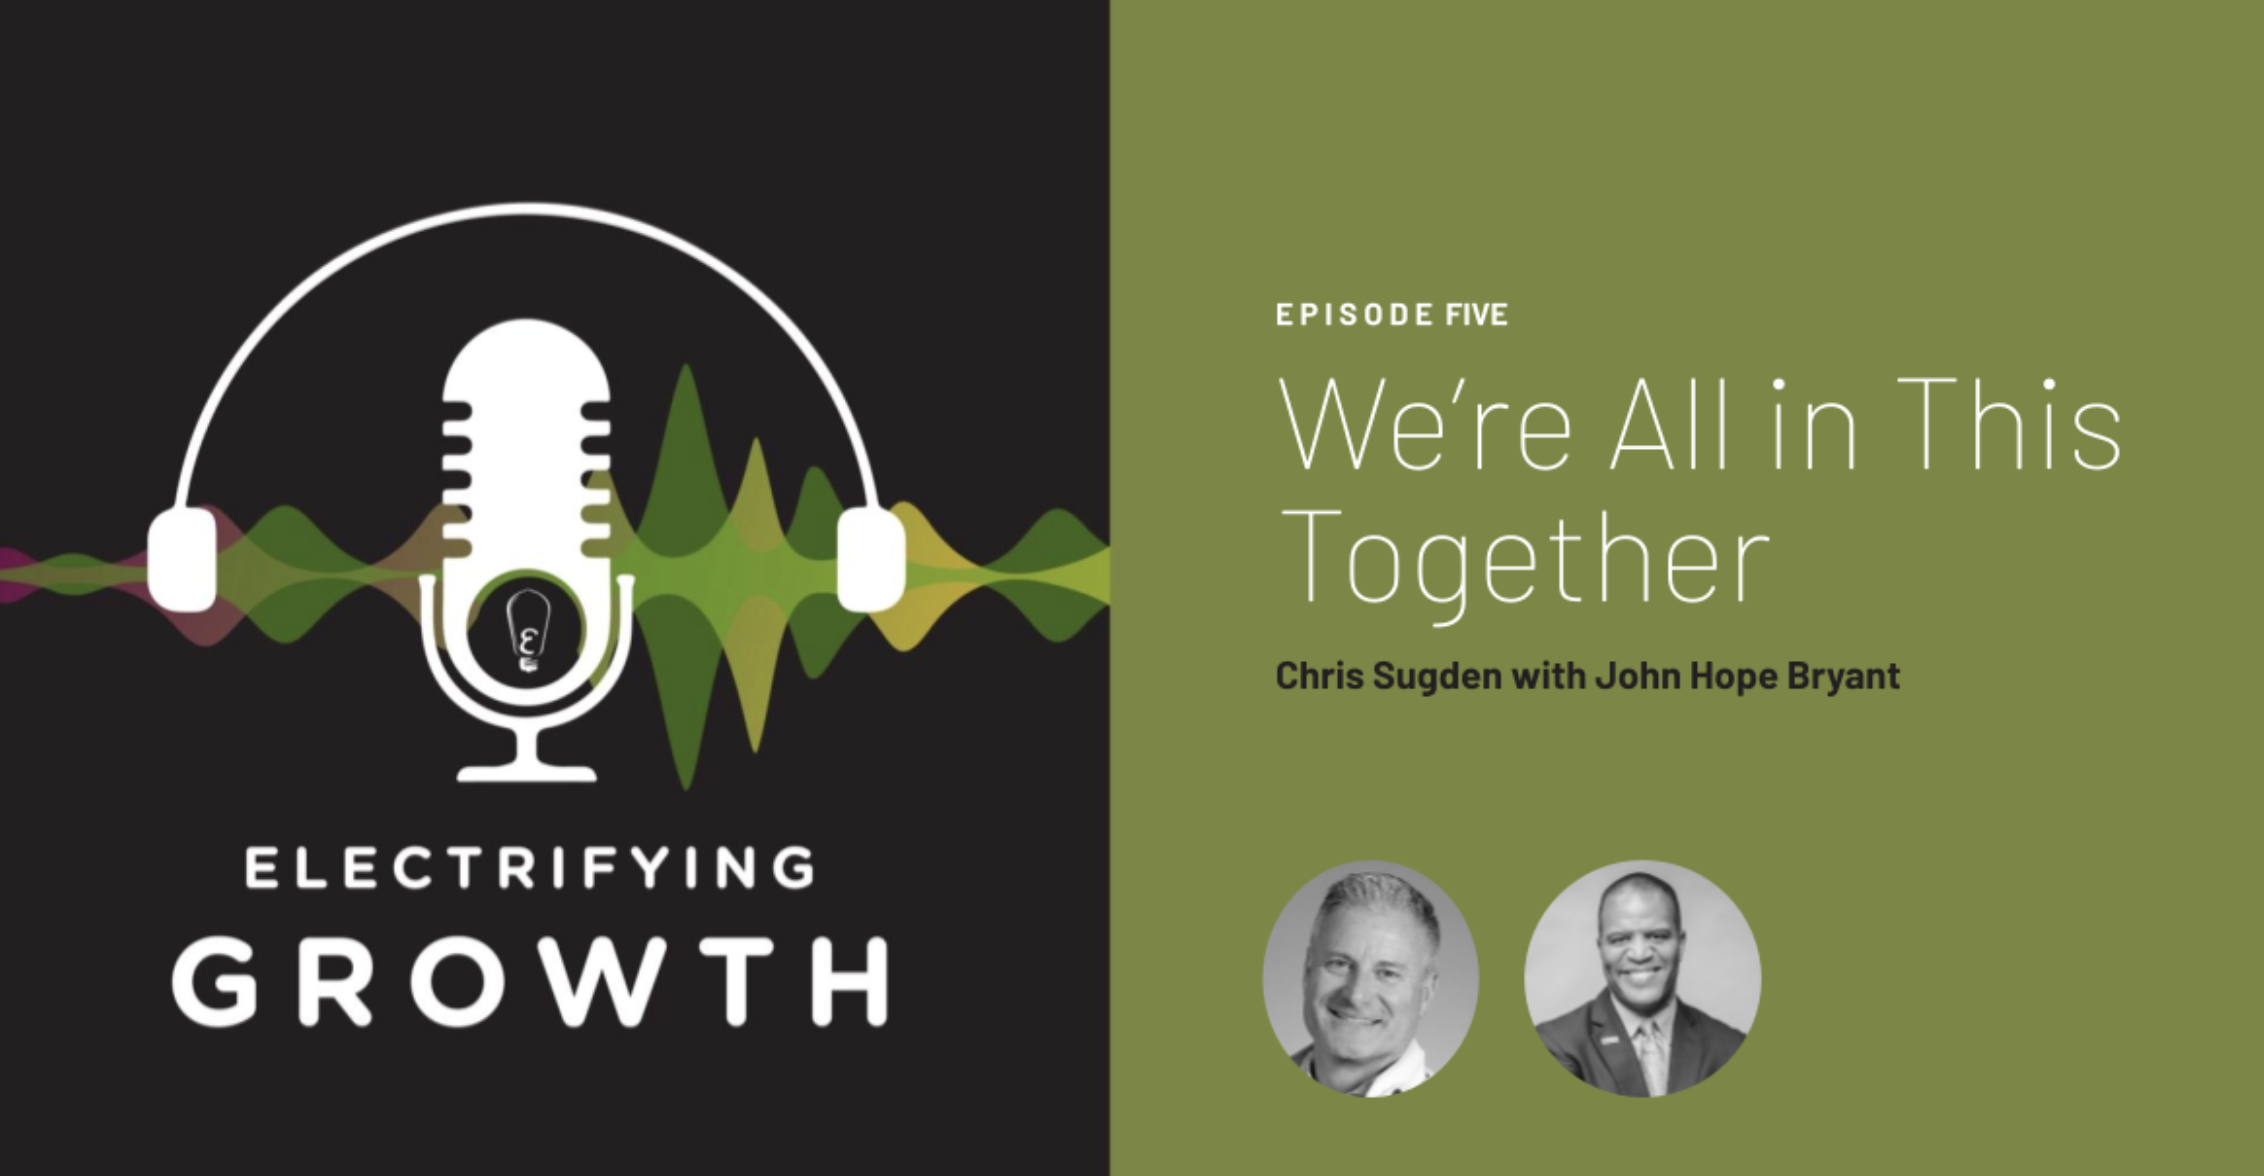 Electrifying Growth Episode 5 : We’re All in This Together with John Hope Bryant